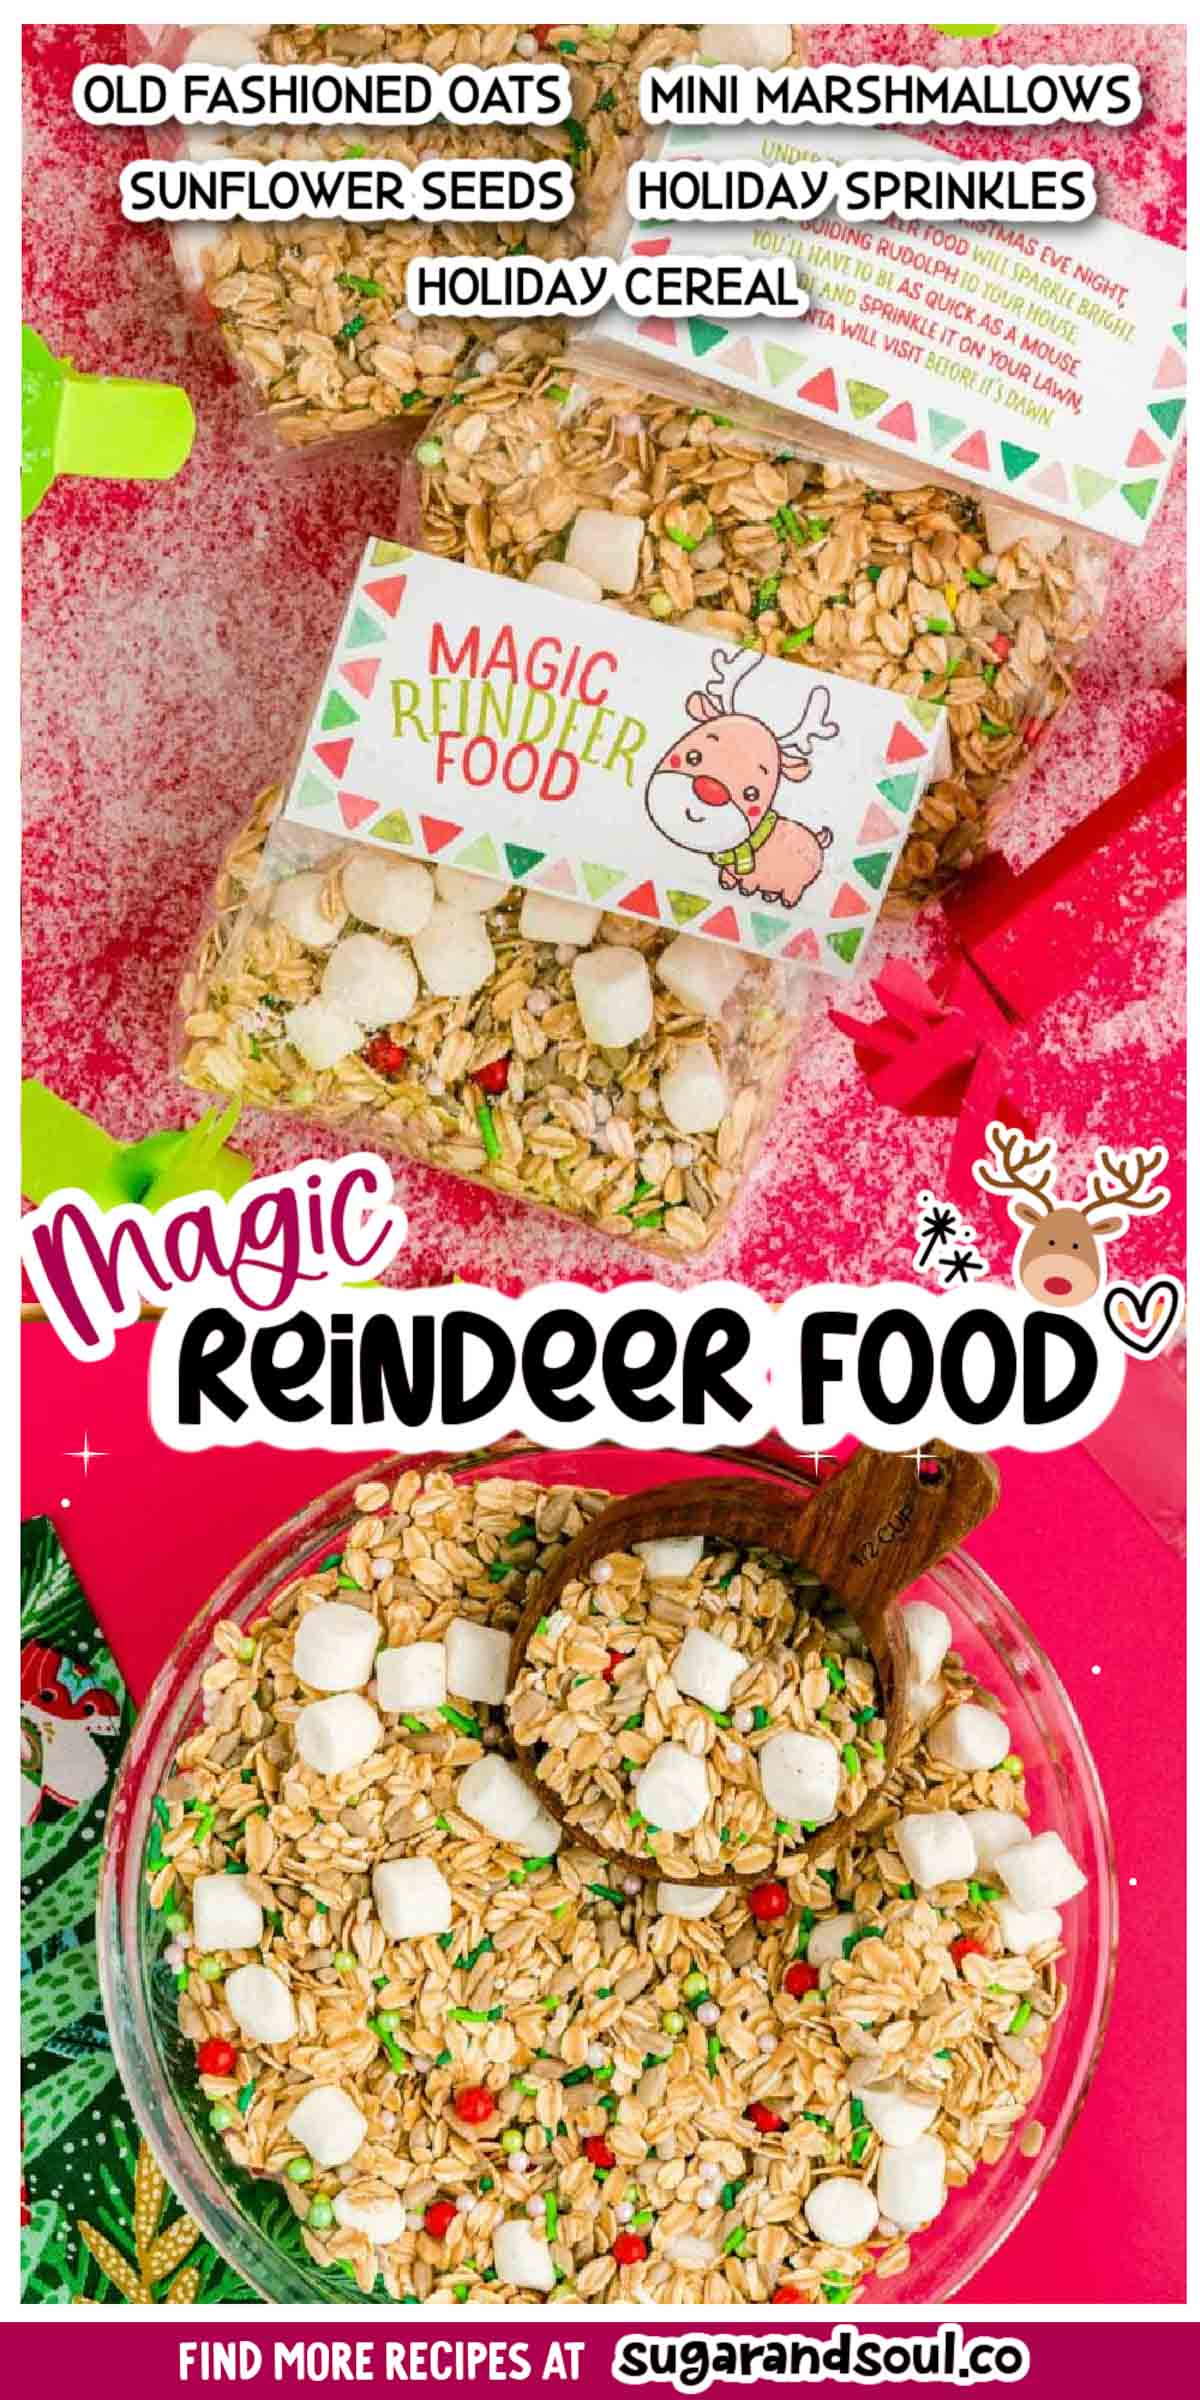 Magic Reindeer Food & Poem is a simple and fun Christmas tradition! Make it in minutes with pantry staples and snag these FREE printable poem labels to package it up for the kids to spread on the lawn to guide Rudolph and Santa to your house on Christmas Eve! via @sugarandsoulco